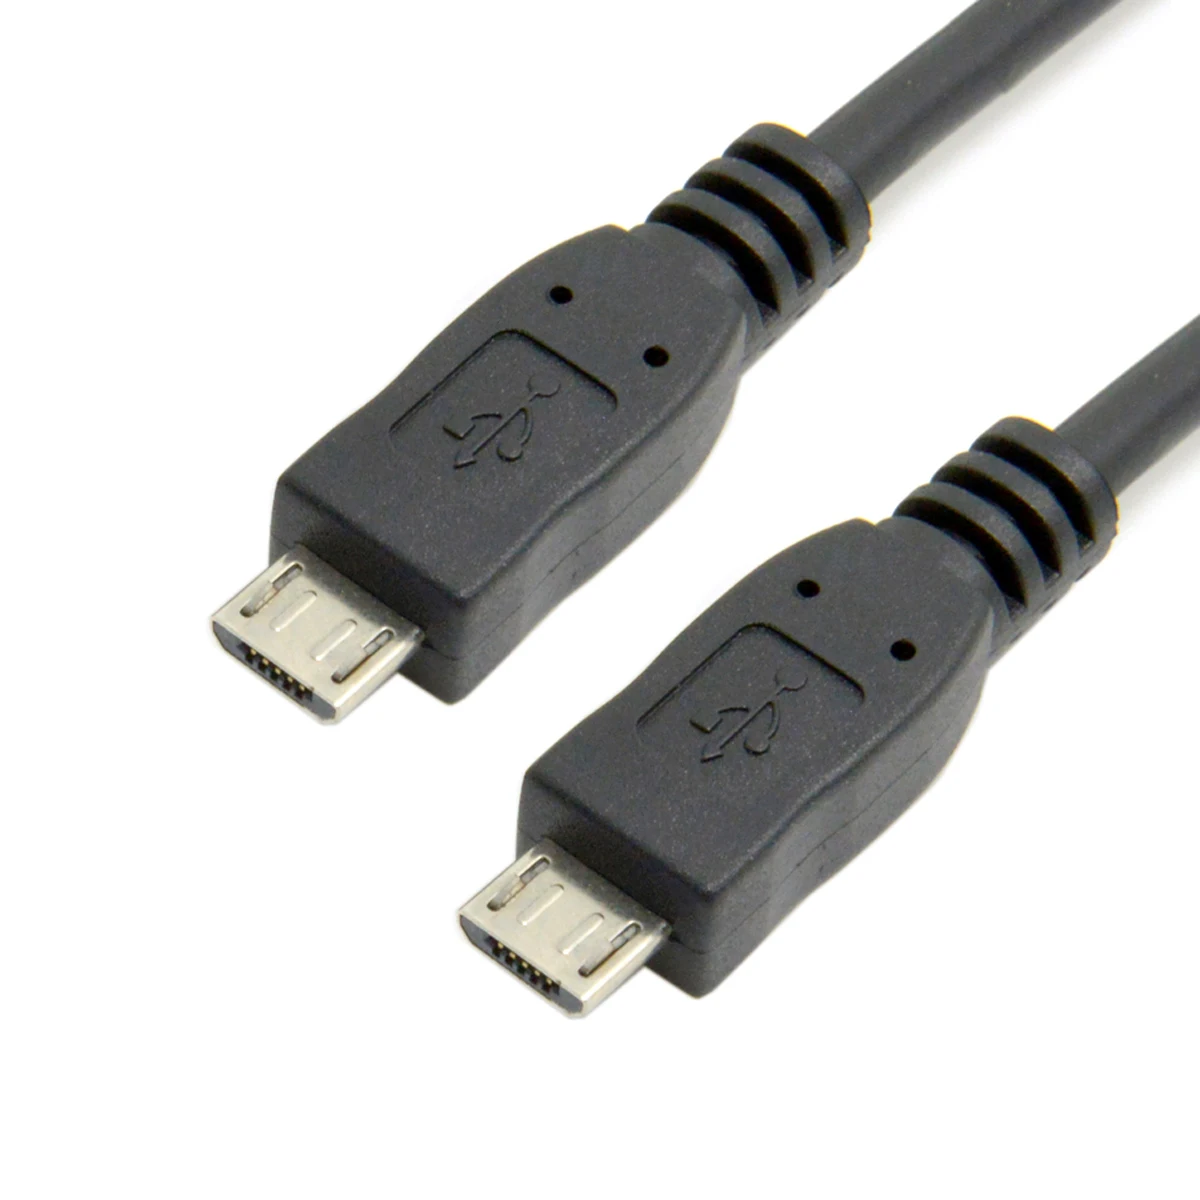 

CY Micro USB Cable for S4 i9500 Note2 N7100 Mobile Phone Tablet Micro USB Cable Charger Data Cord Micro USB to Micro USB Adapter